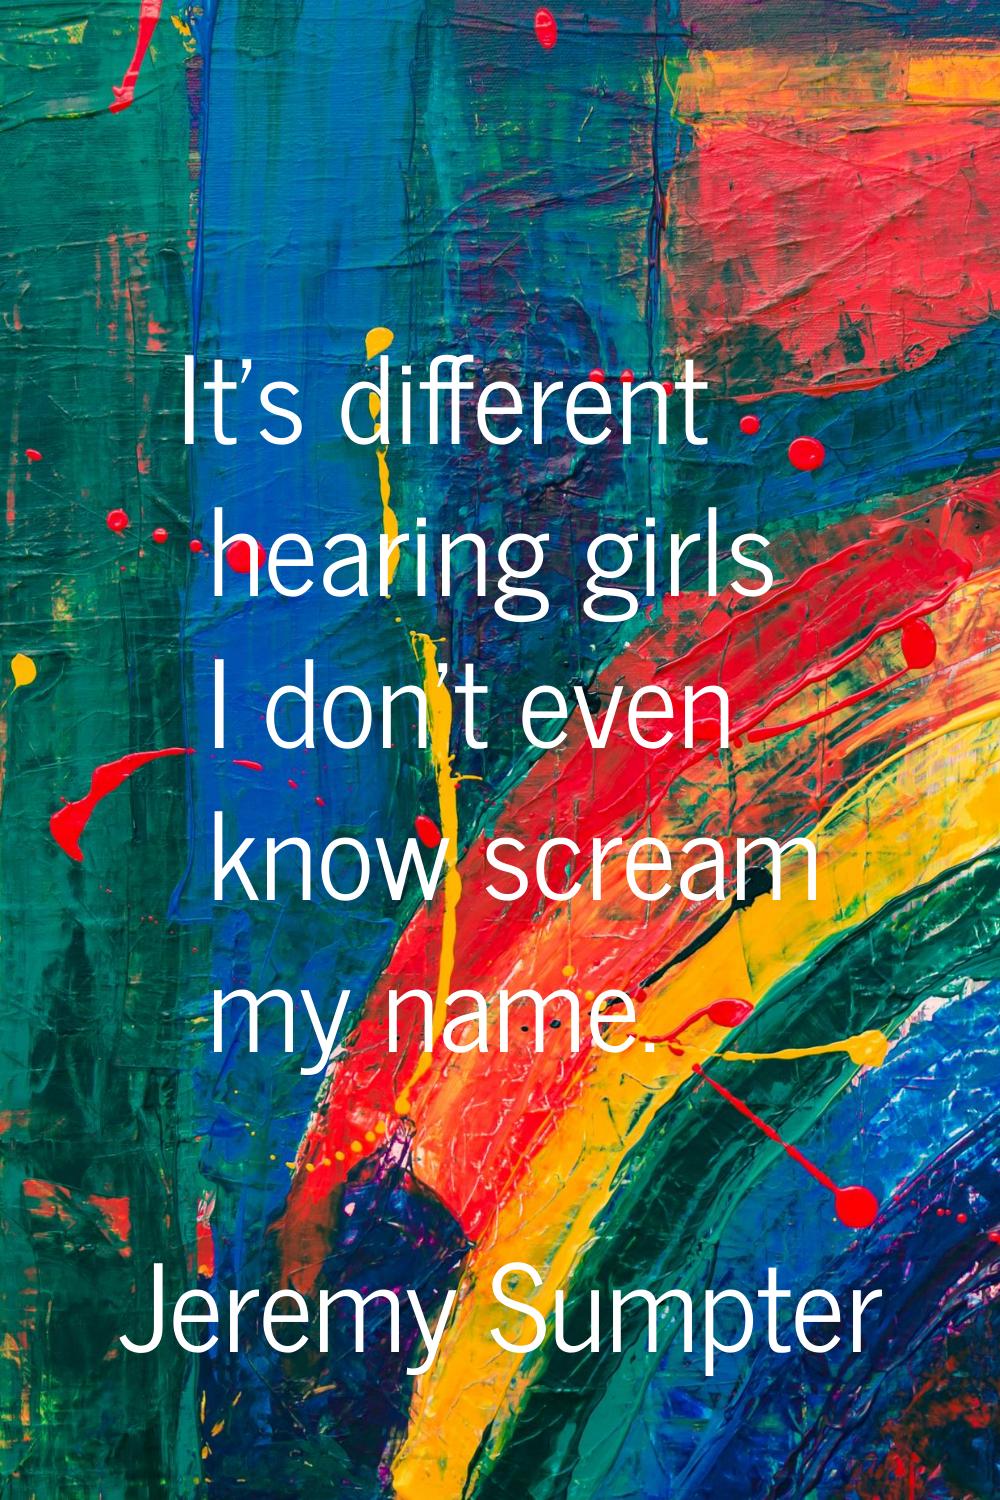 It's different hearing girls I don't even know scream my name.